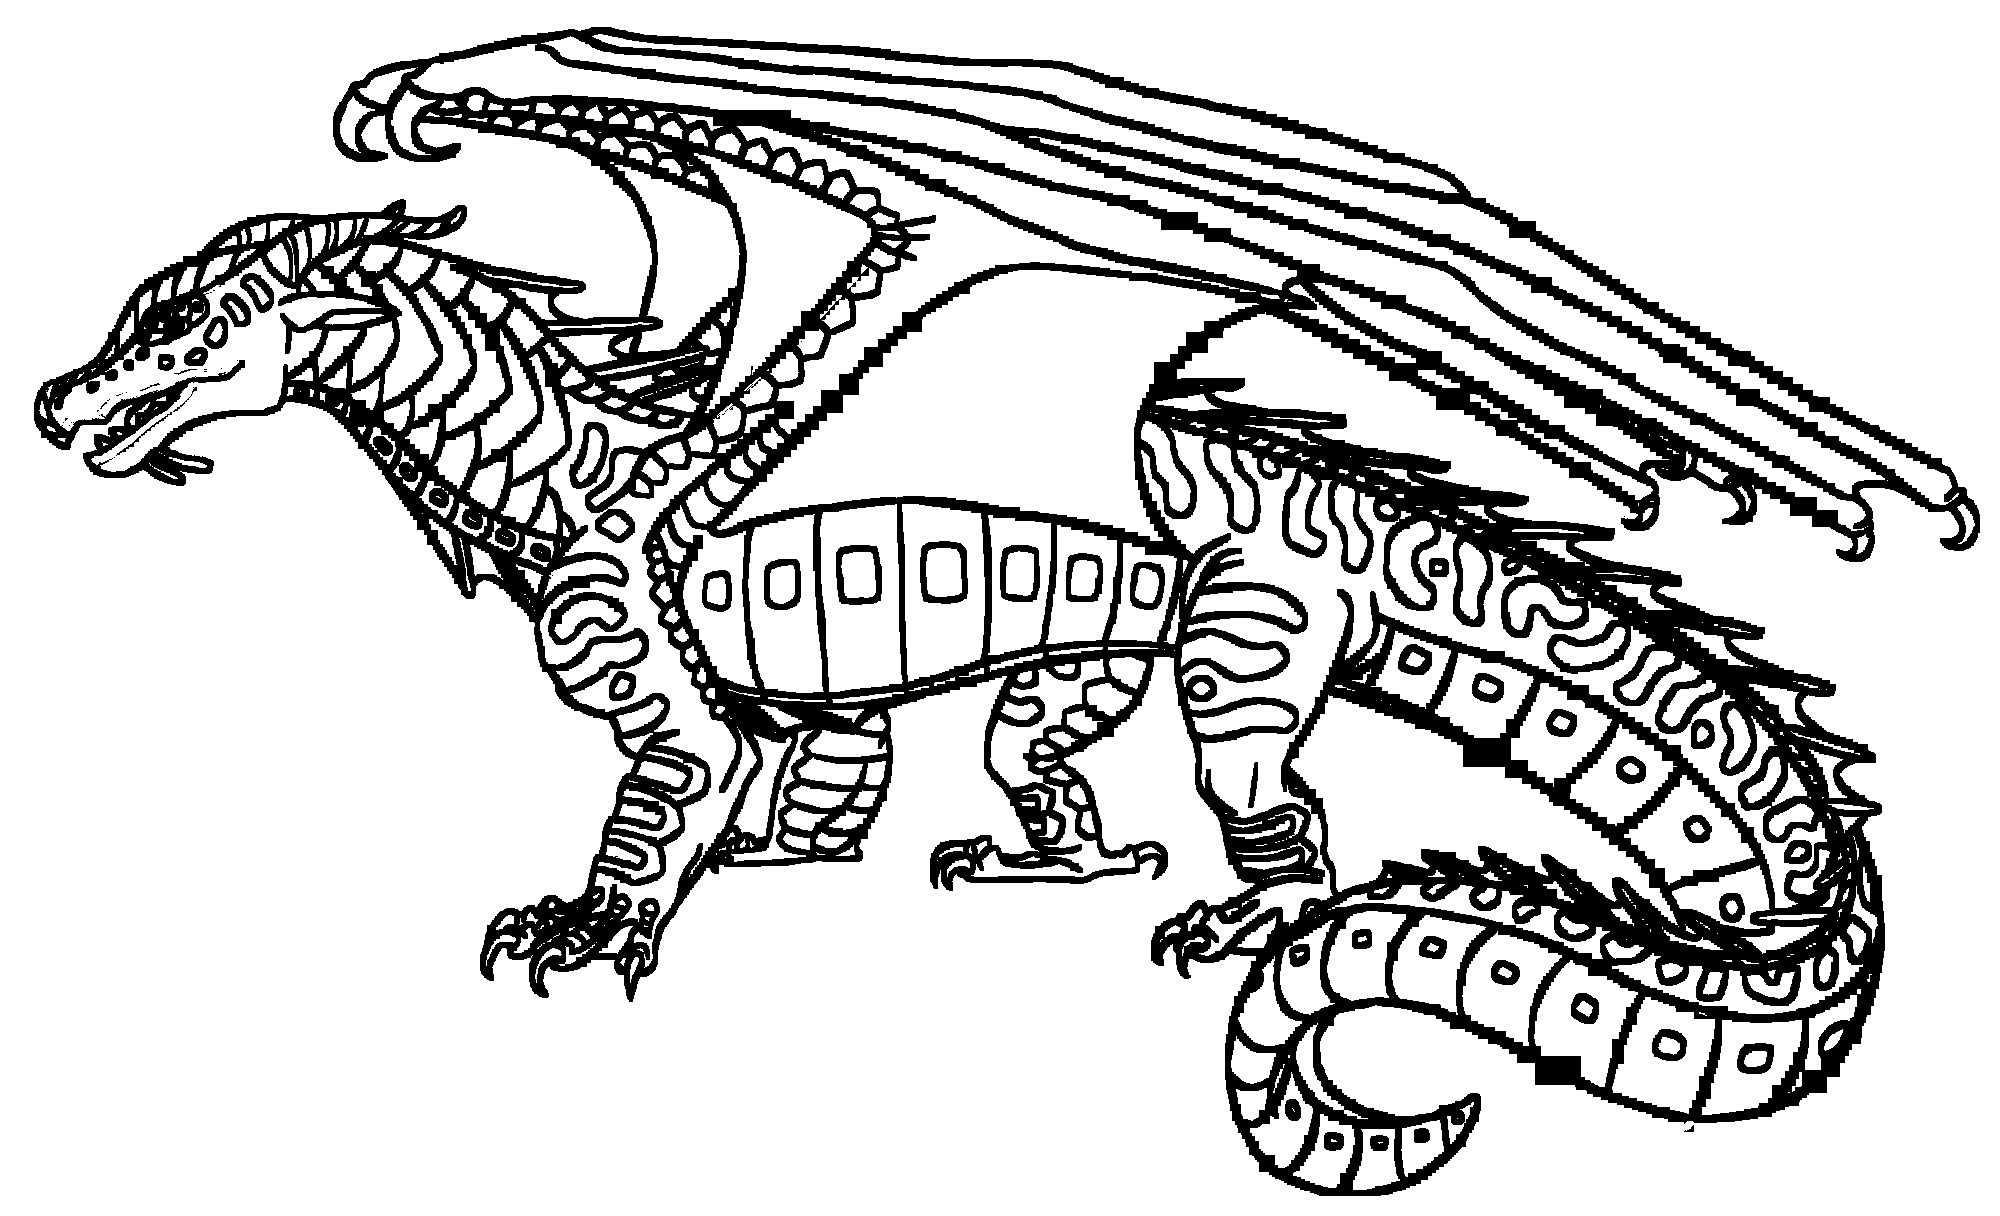 wings of fire coloring pages elegant wings fire dragons coloring pages sketch coloring page